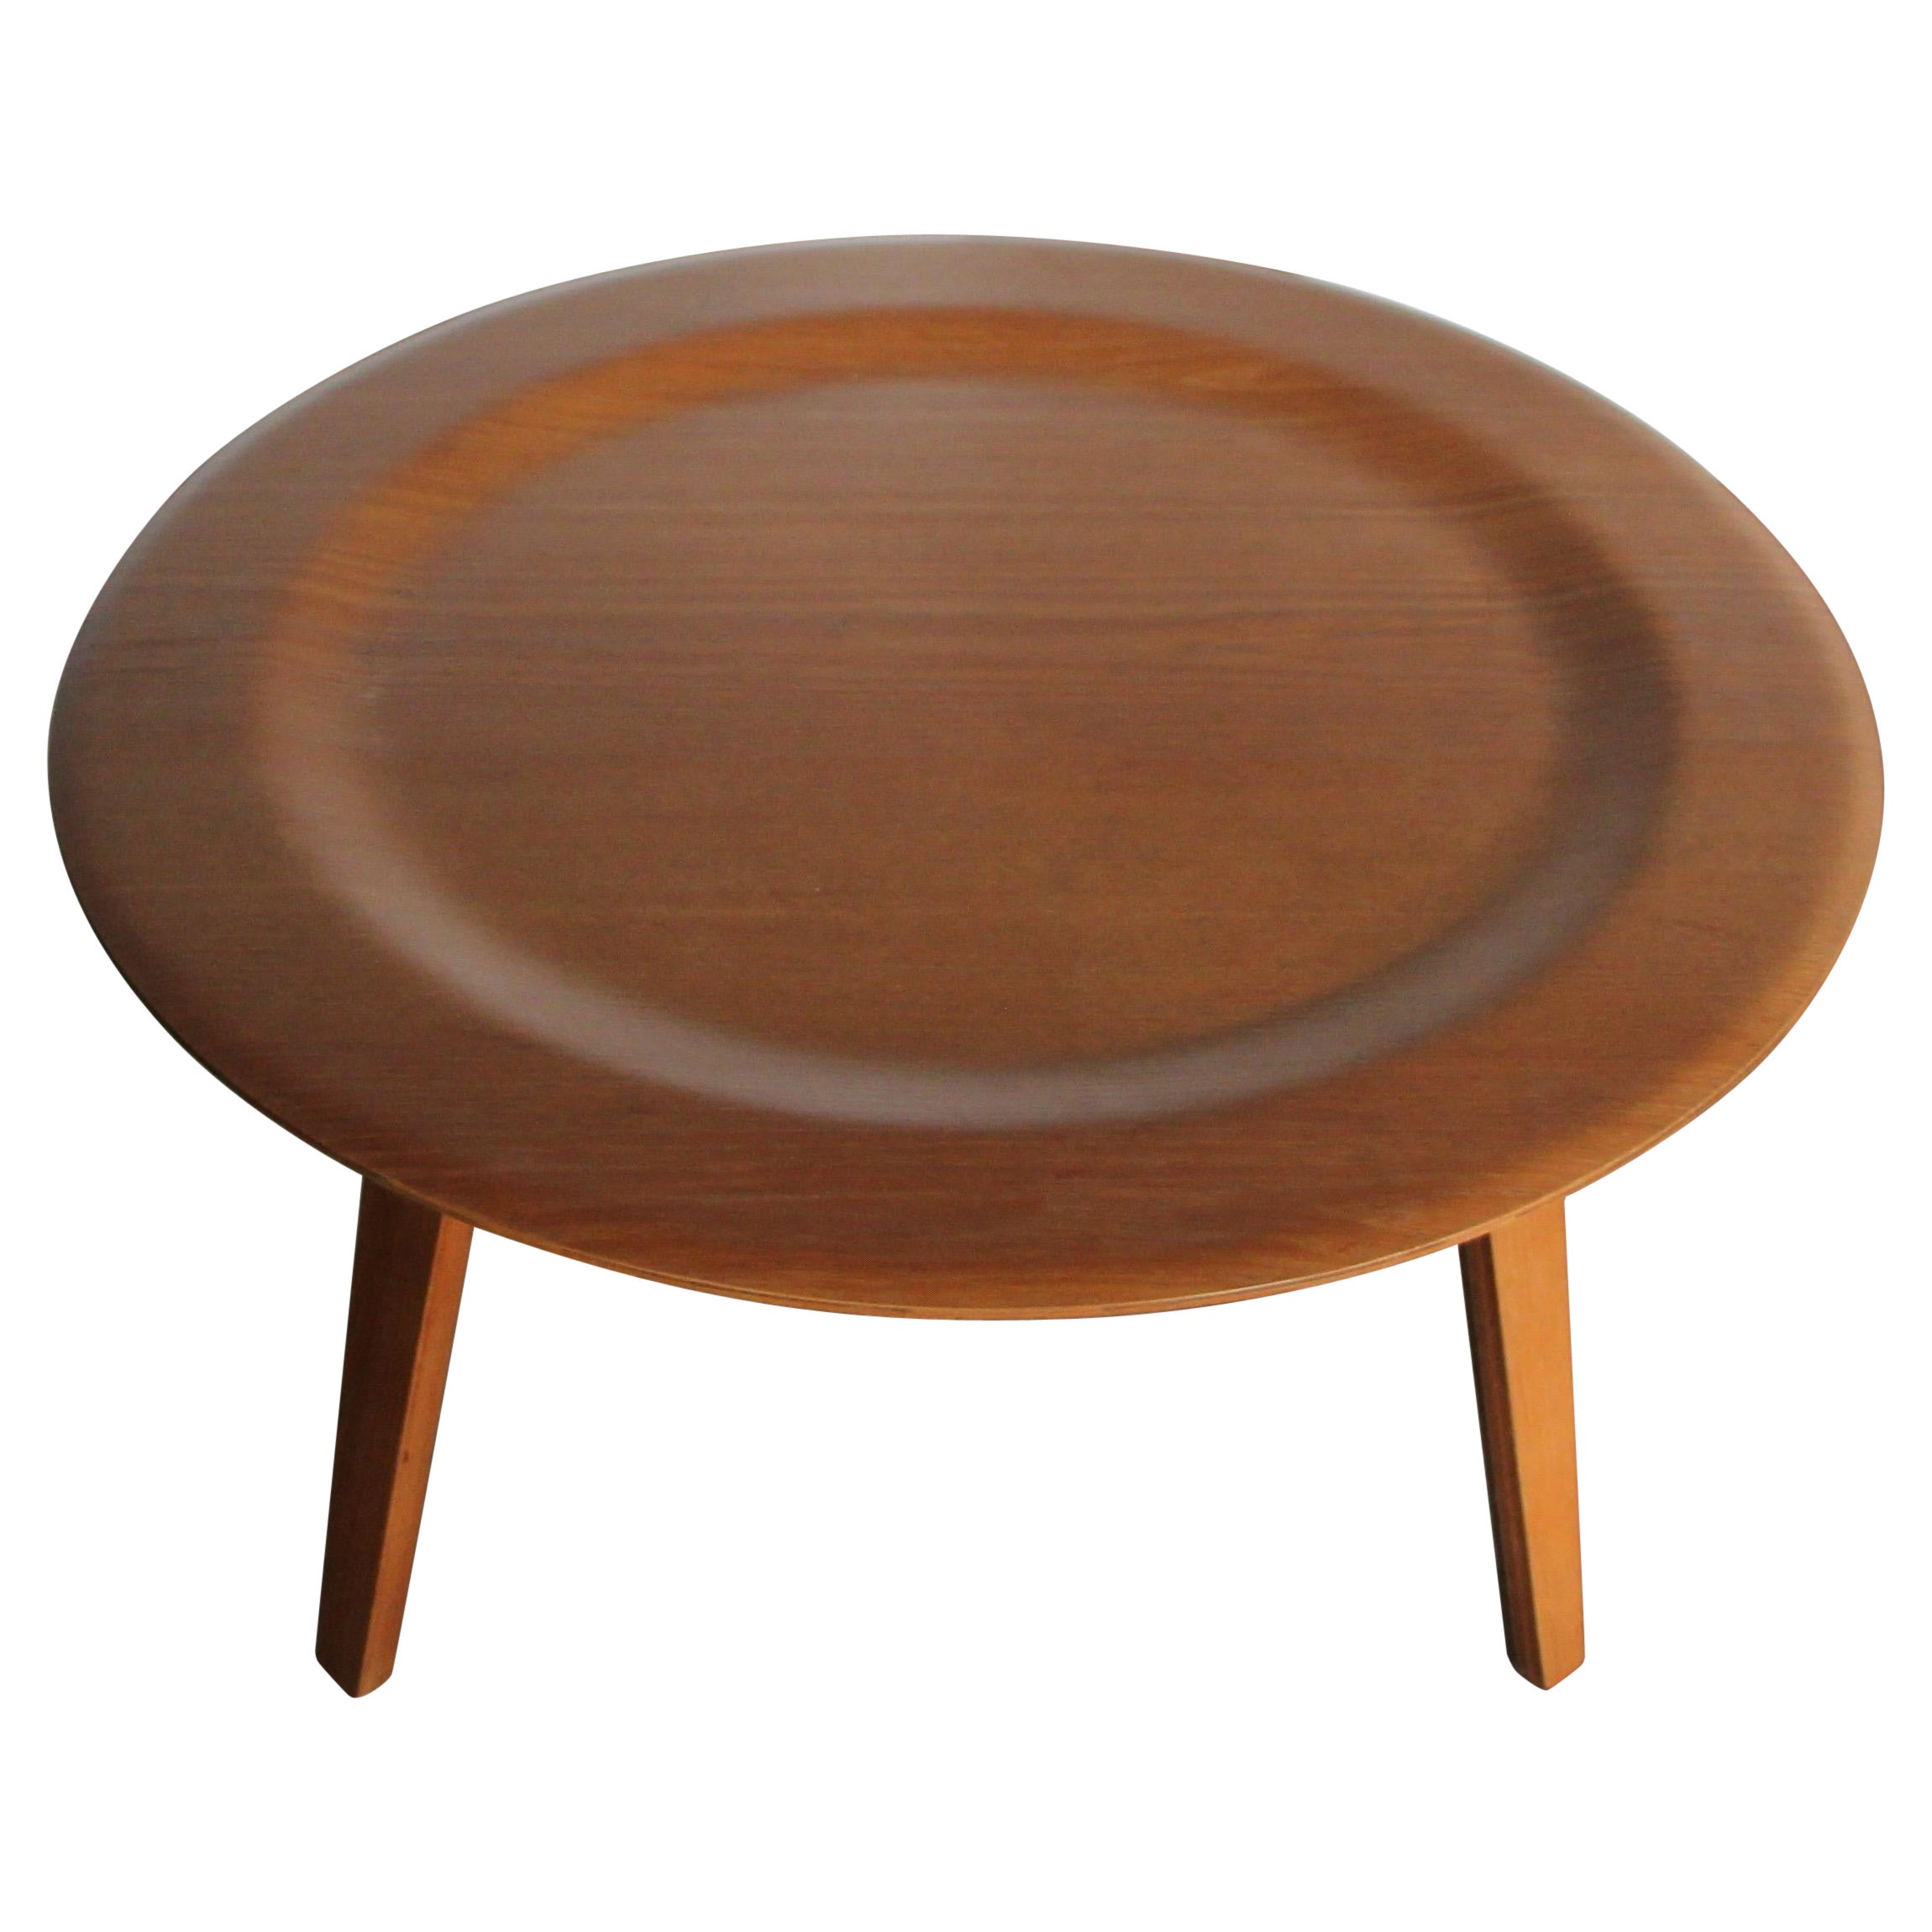 Early Production "CTW" Molded Plywood Coffee Table by Charles & Ray Eames For Sale